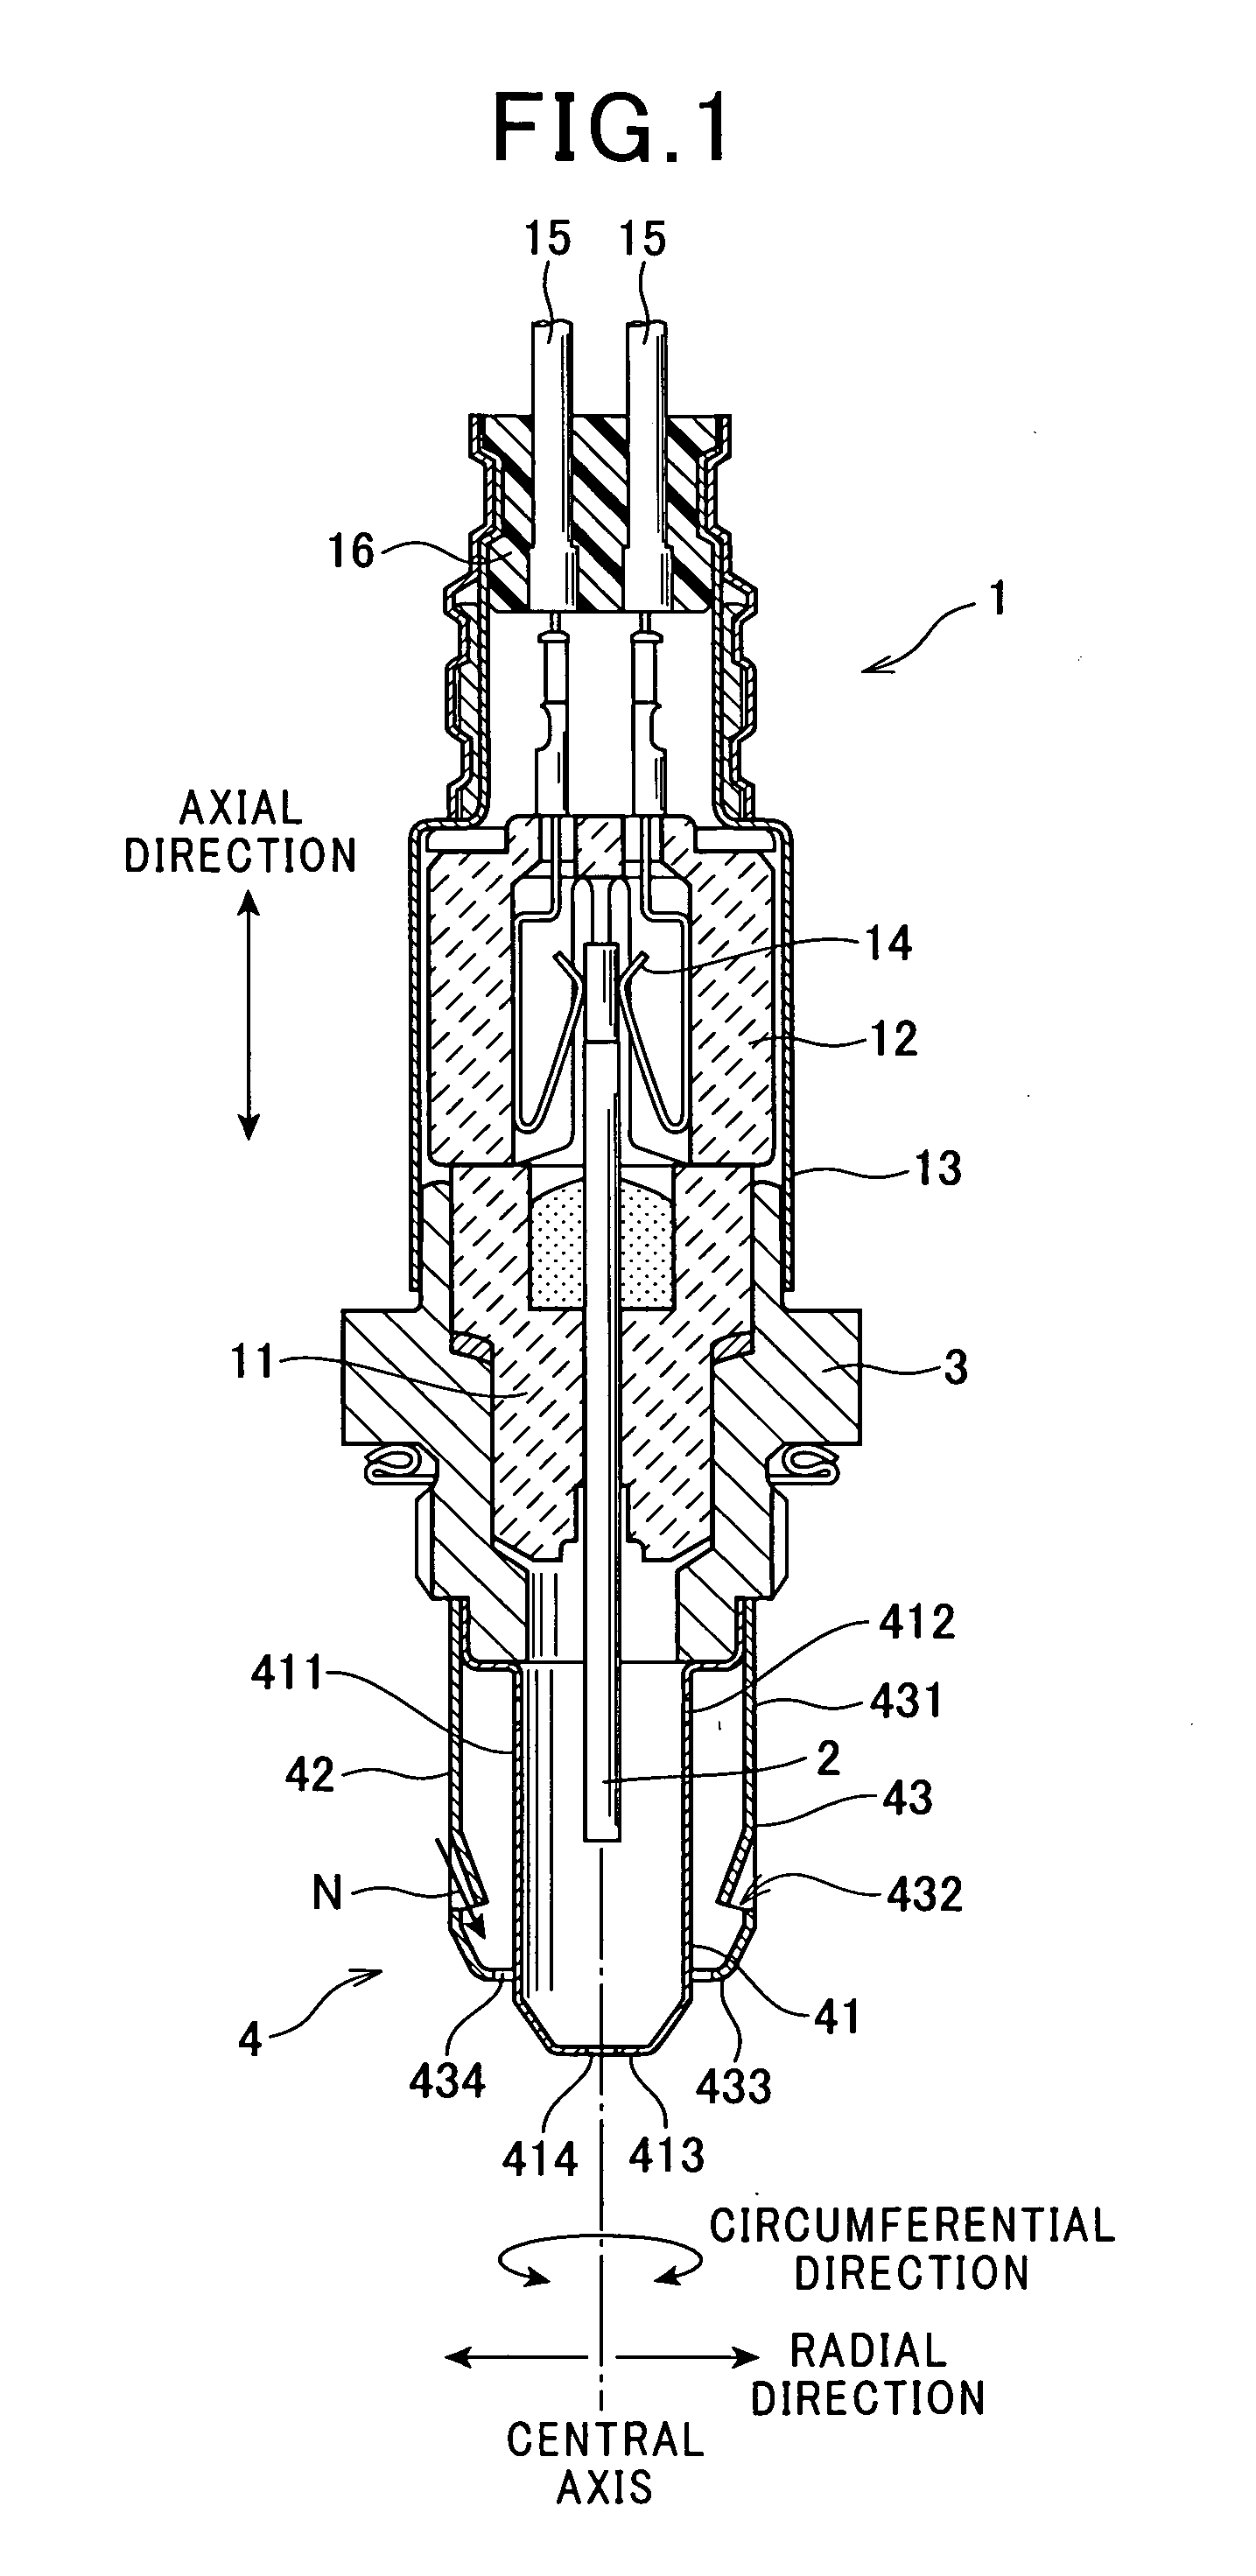 Gas sensor provided with inner and outer covers for gas sensing element